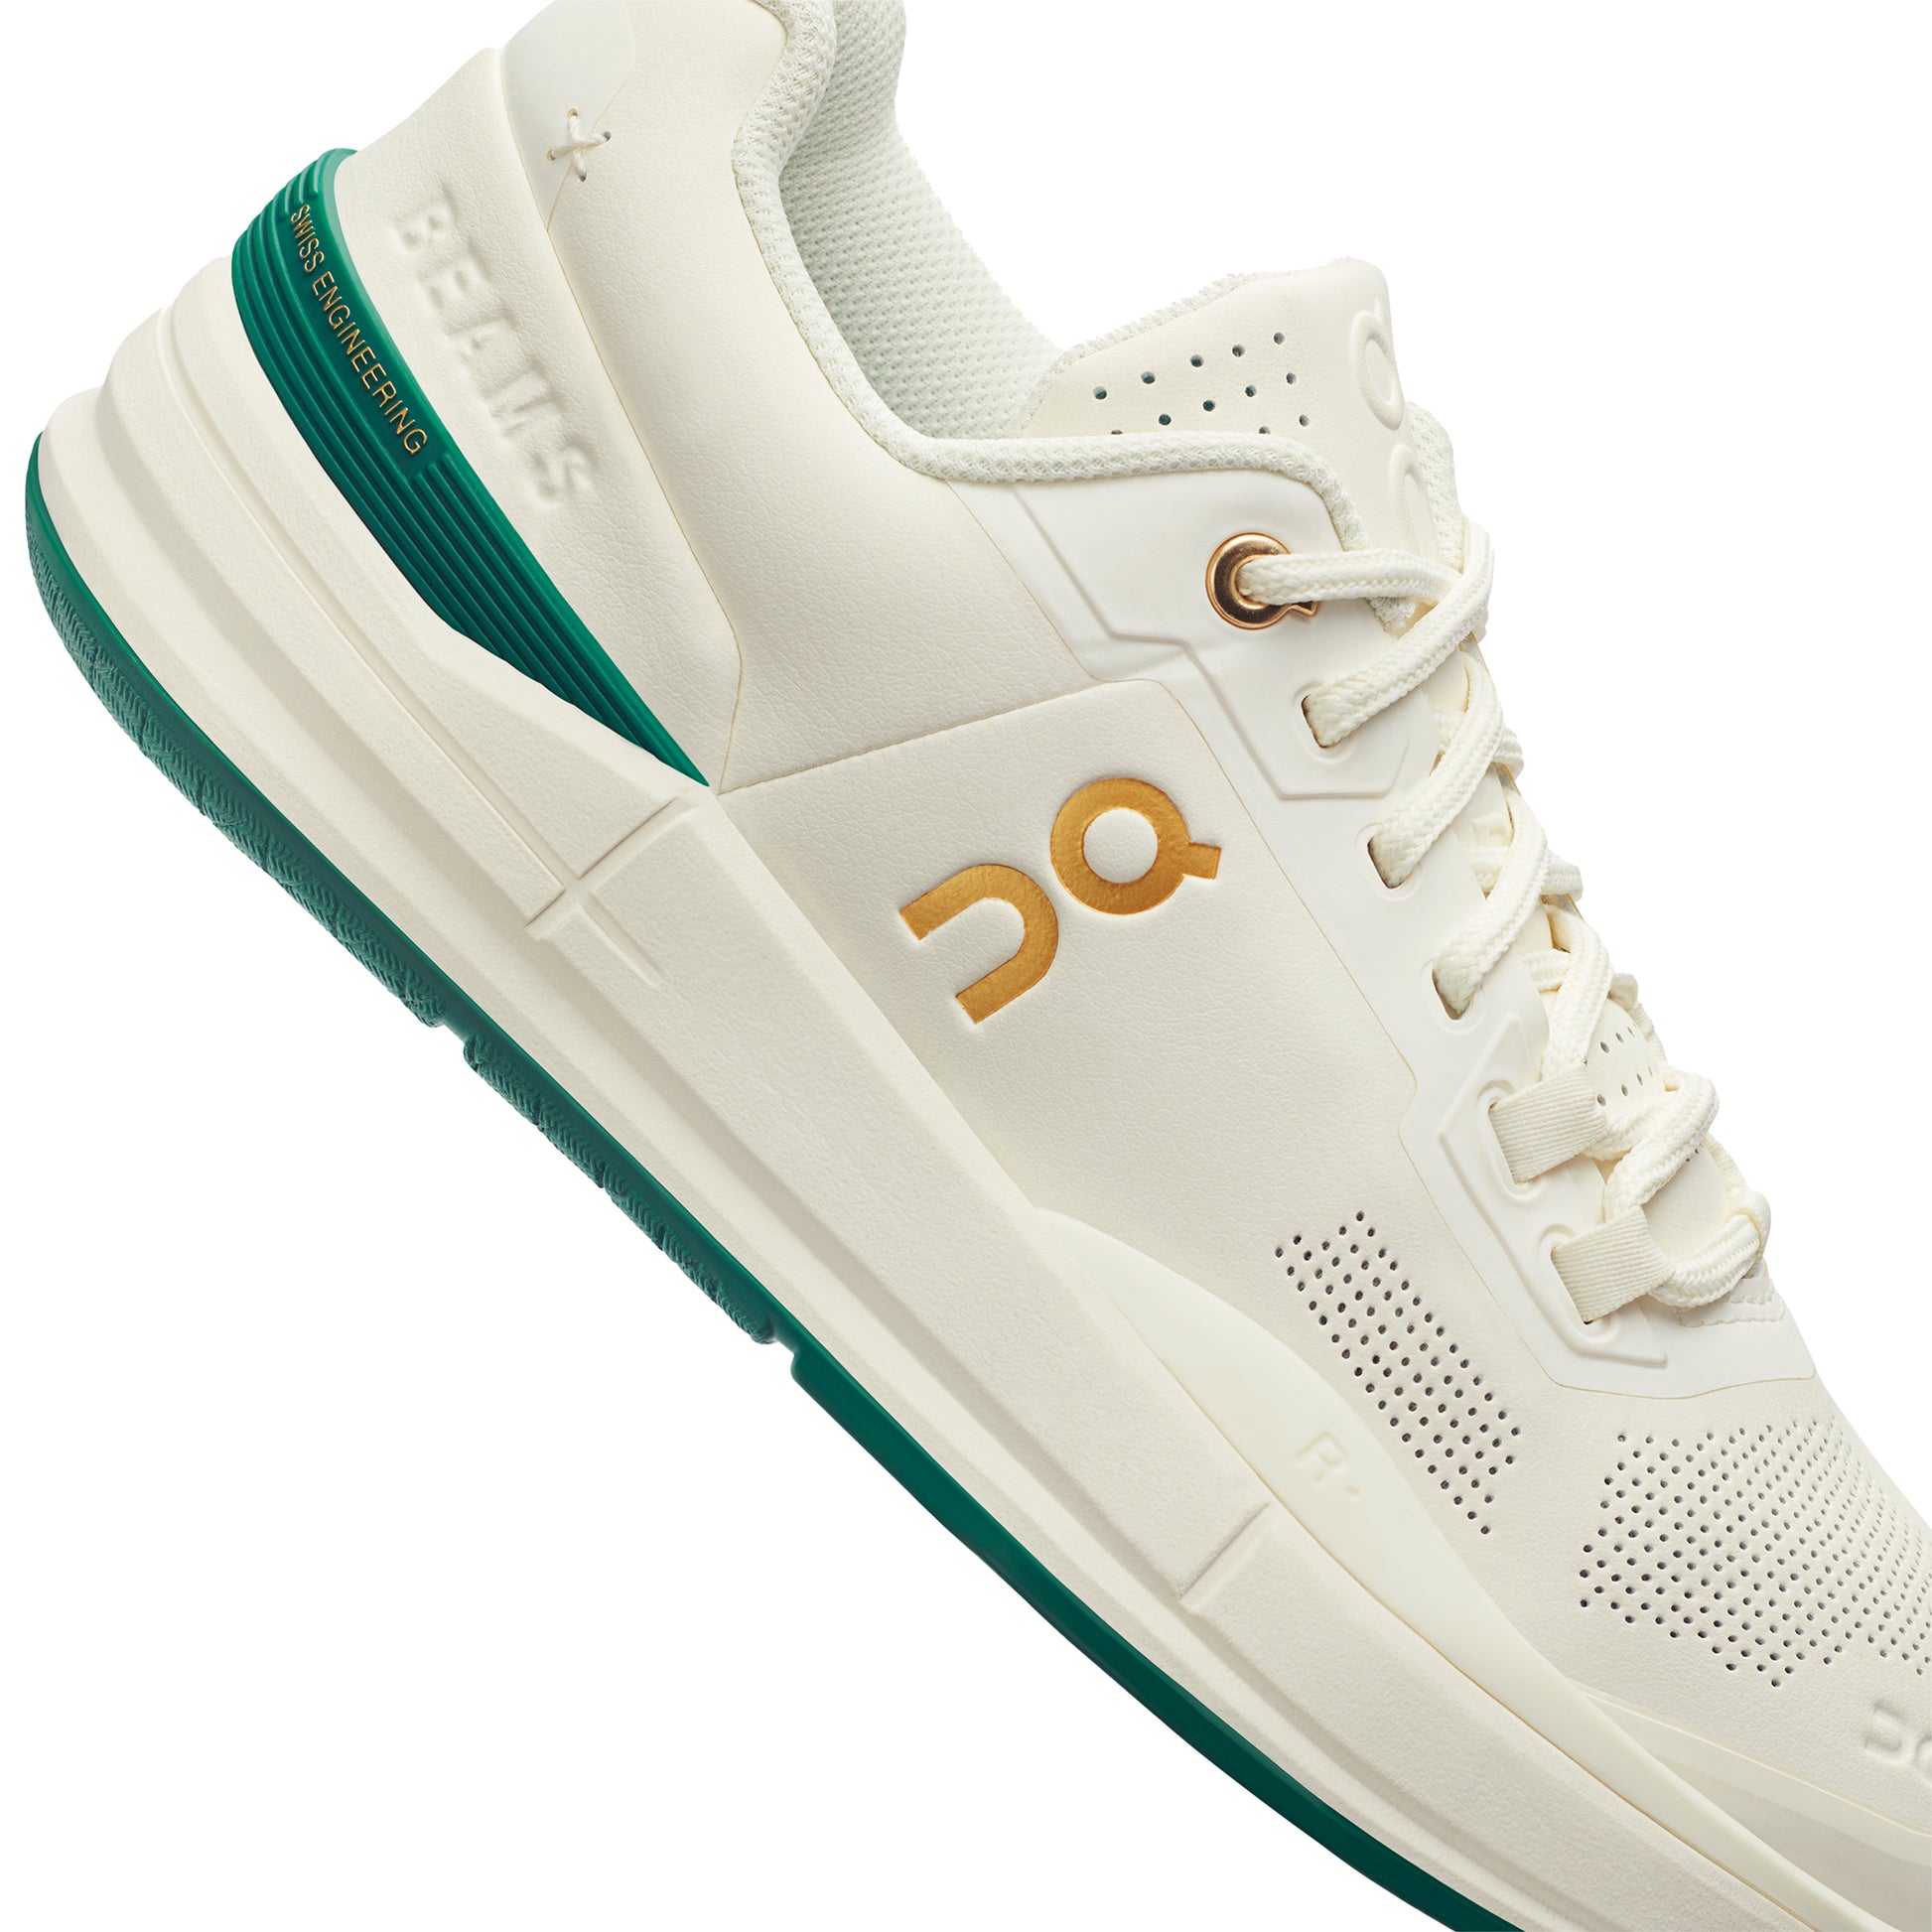 ON X BEAMS WOMEN'S THE ROGER PRO IVORY/EVERGREEN